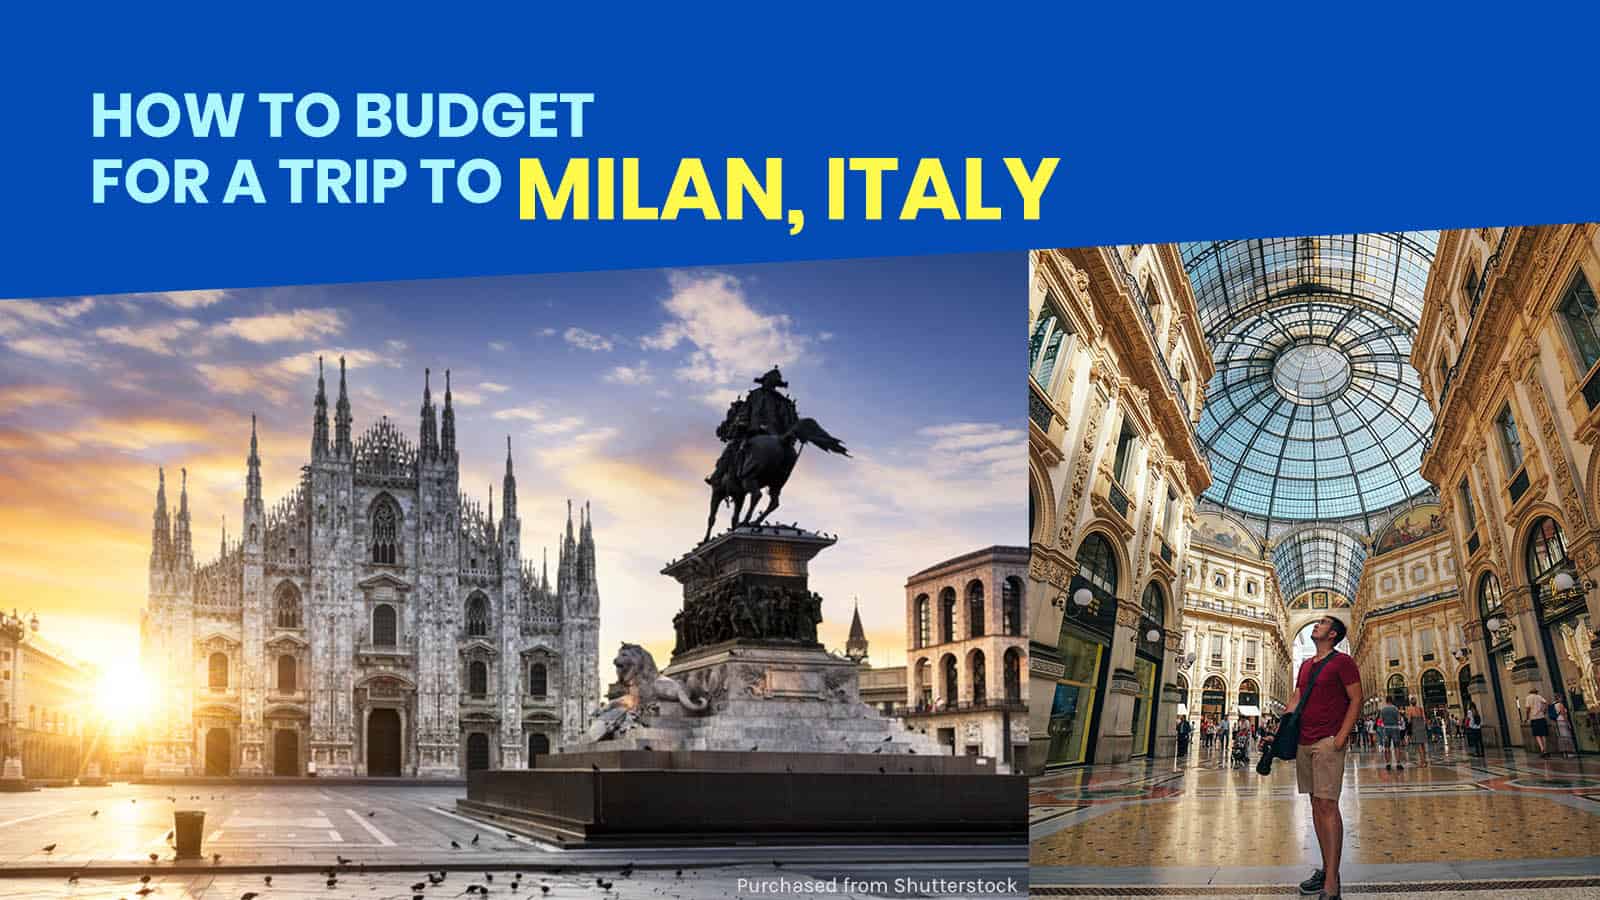 MILAN TRAVEL GUIDE with Sample Itinerary & Budget